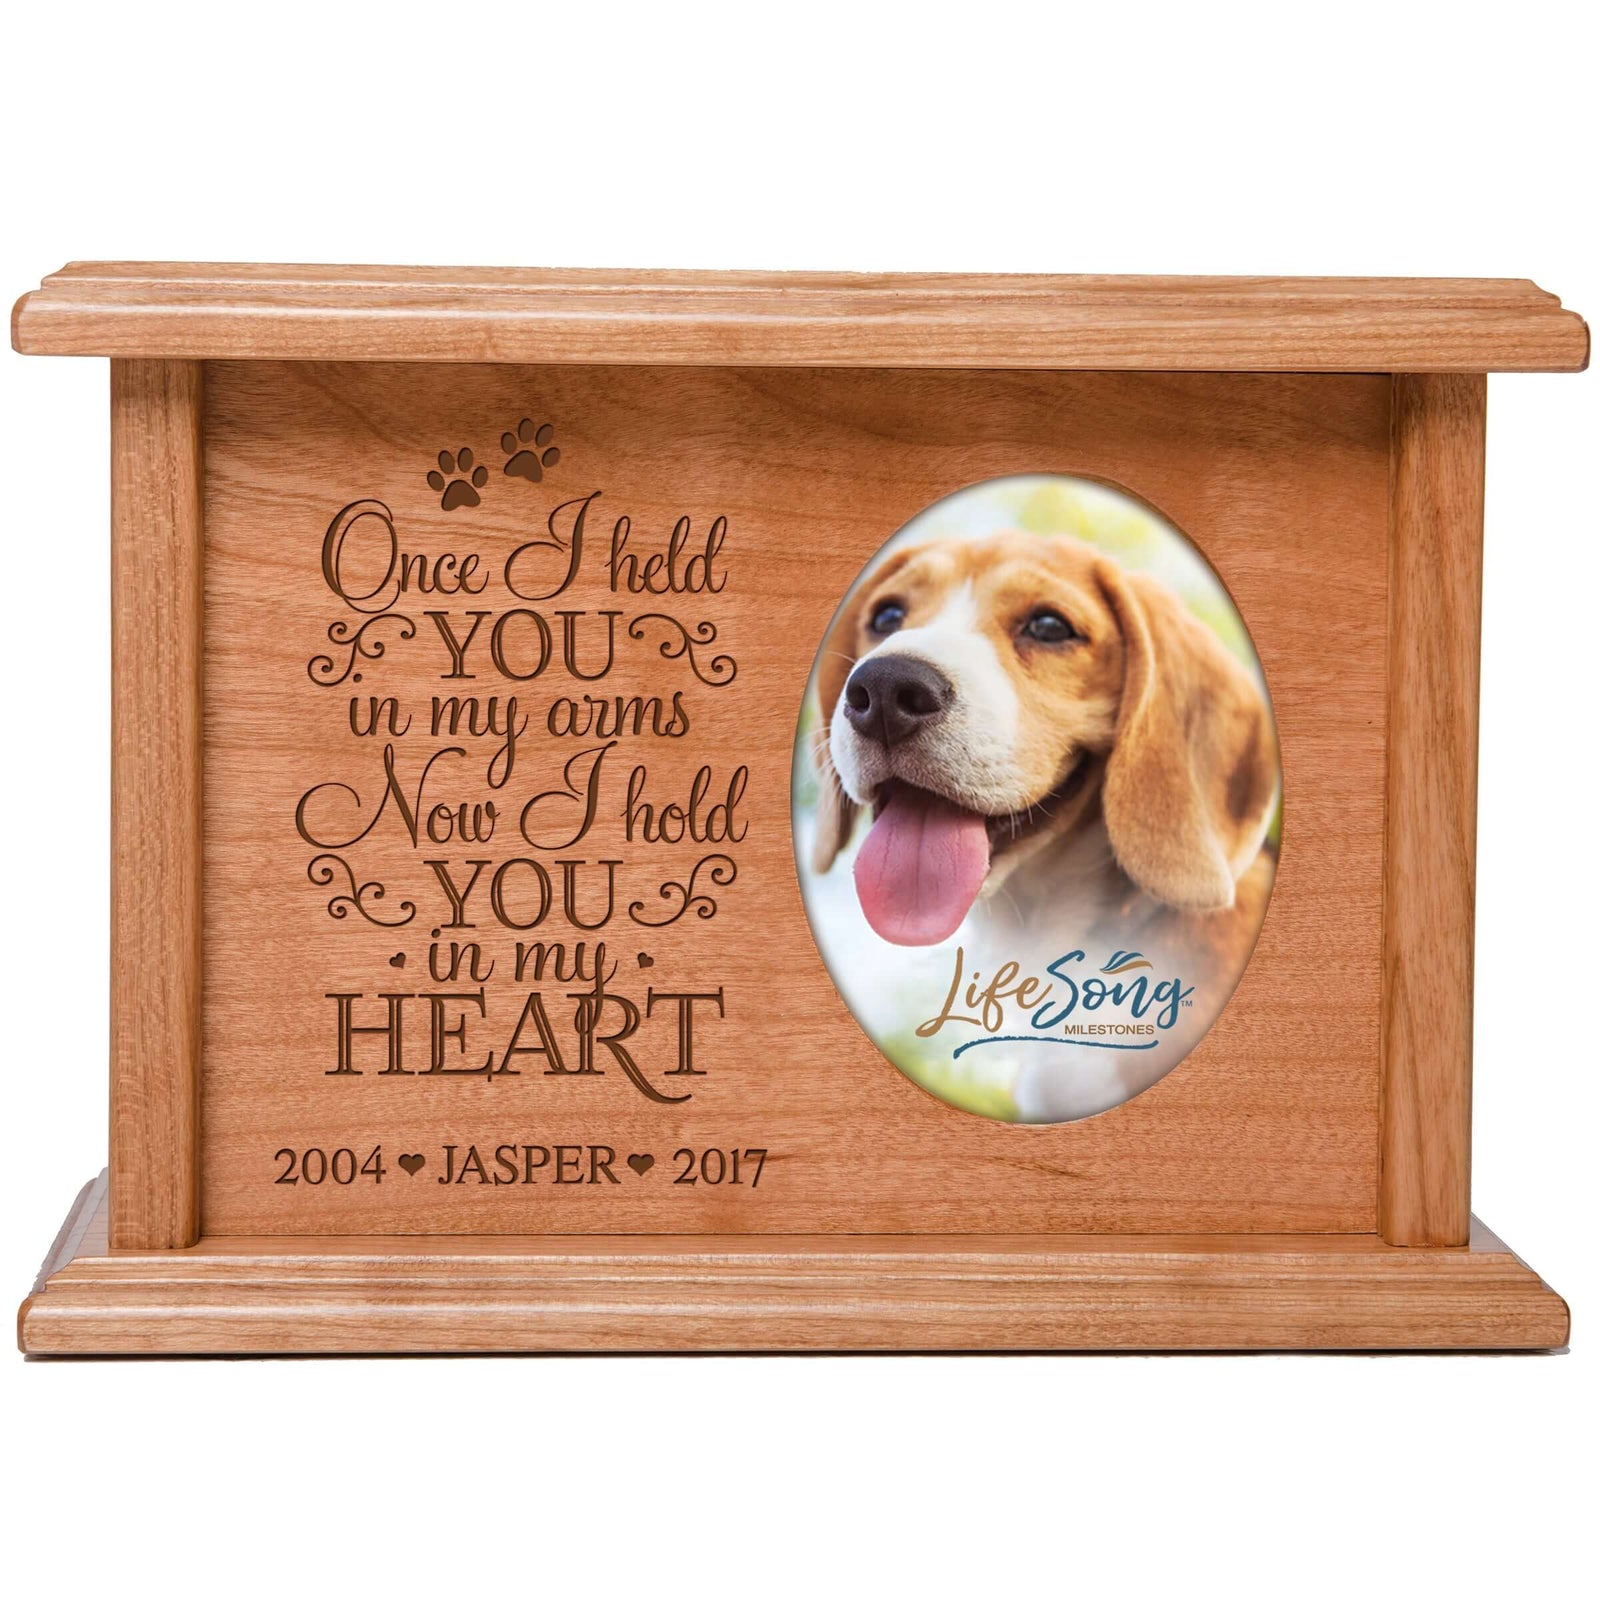 Pet Memorial Picture Cremation Urn Box for Dog or Cat - Once I Held You In My Arms